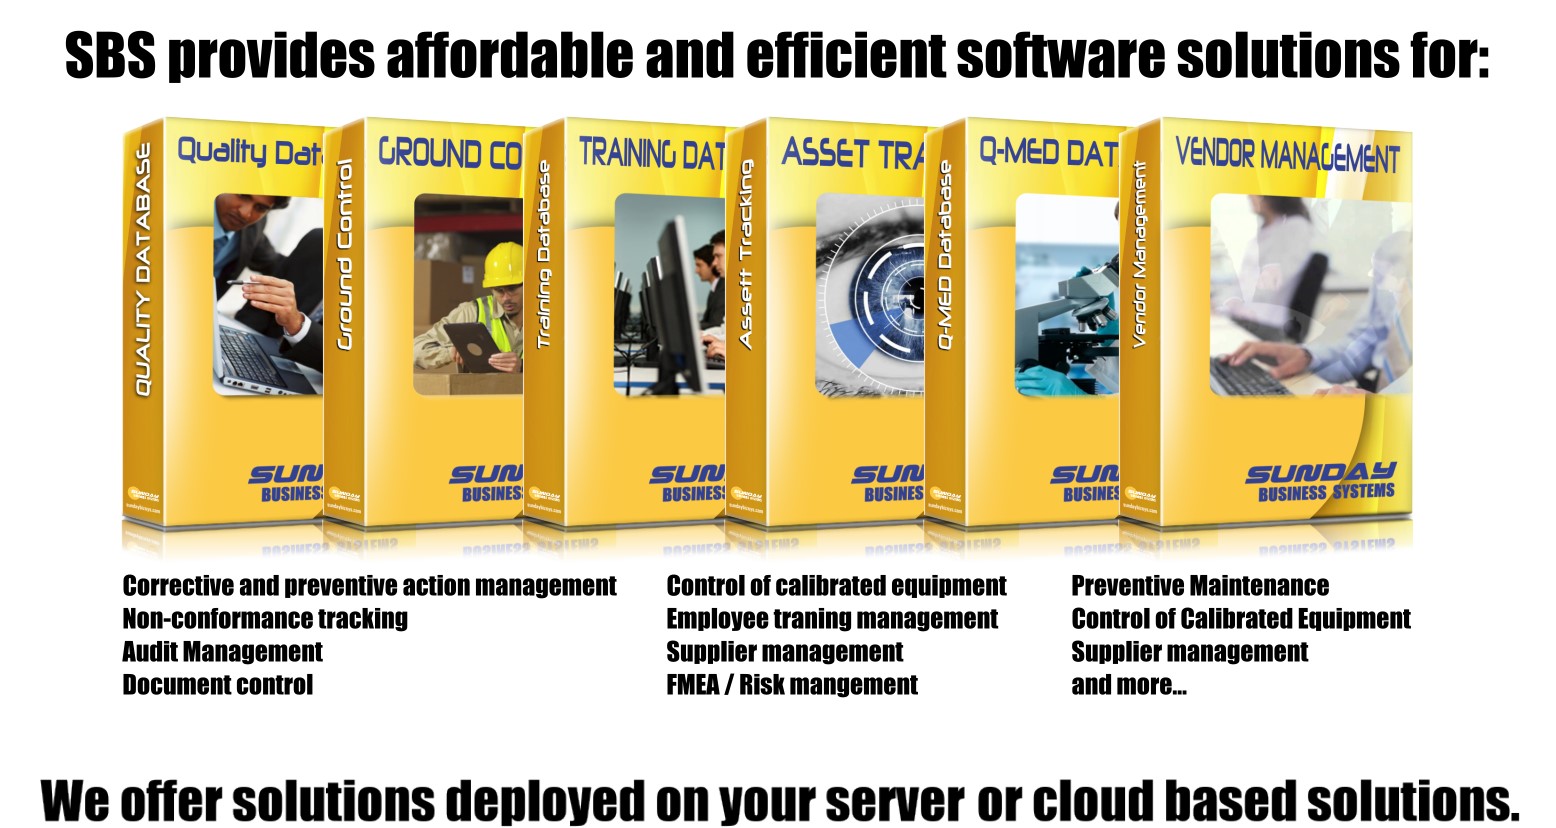 SBS provides affordable and efficient software solutions for: Corrective and preventive action management; Non-conformance tracking; Audit Management; Document control; Control of calibrated equipment; Employee training management; Supplier management; FMEA / Risk management; Preventive Maintenance; Control of Calibrated Equipment; Supplier management and more... We offer solutions deployed on your server or cloud based solutions.